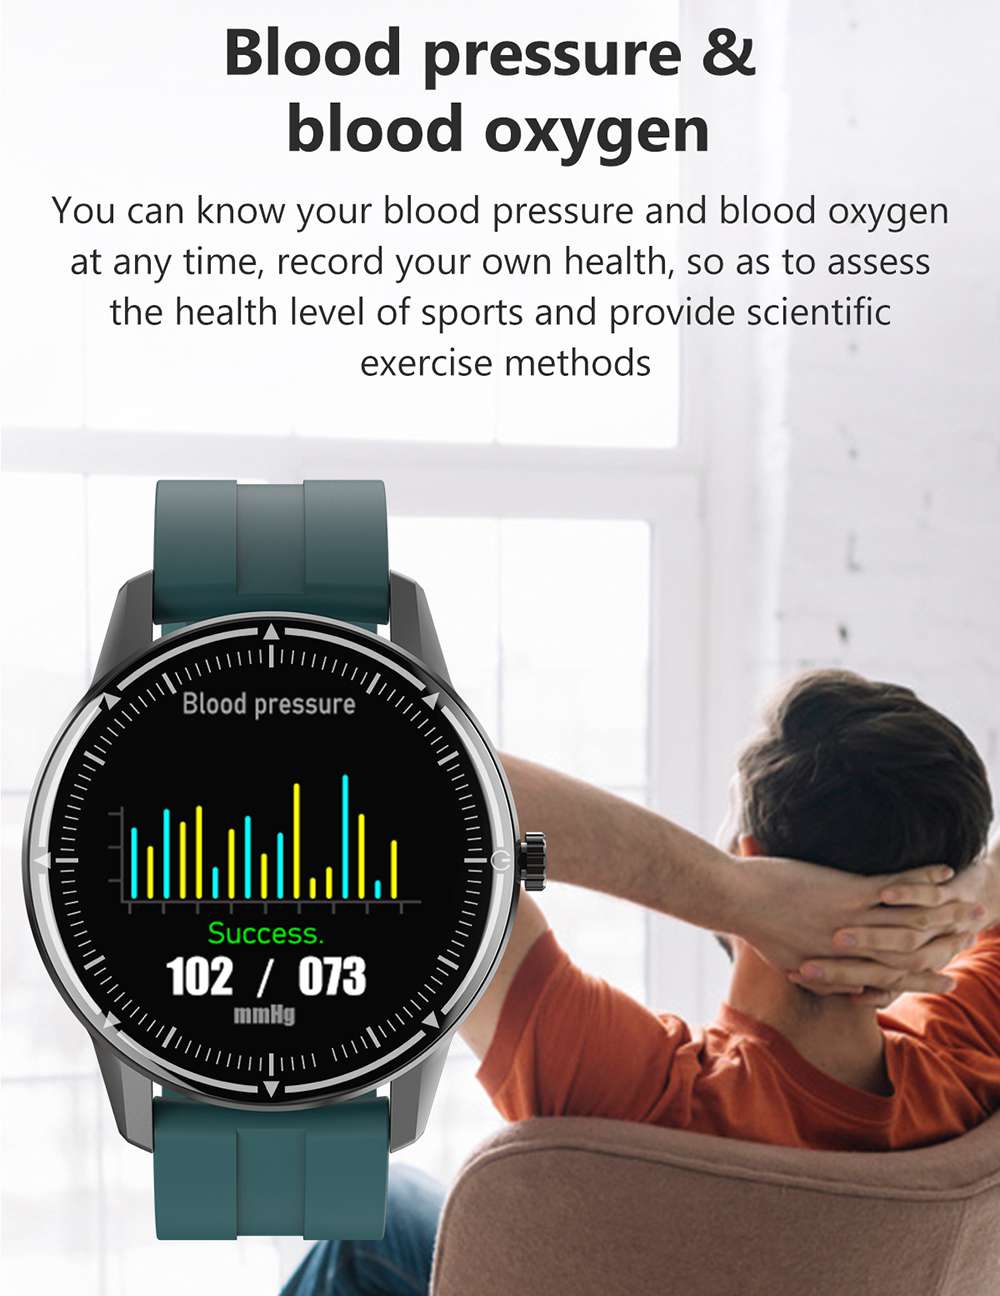 Makibes R8 Smart Watch 1.3 Inch IPS Touch Screen IP67 Heart Rate Blood Pressure Monitor - Orange